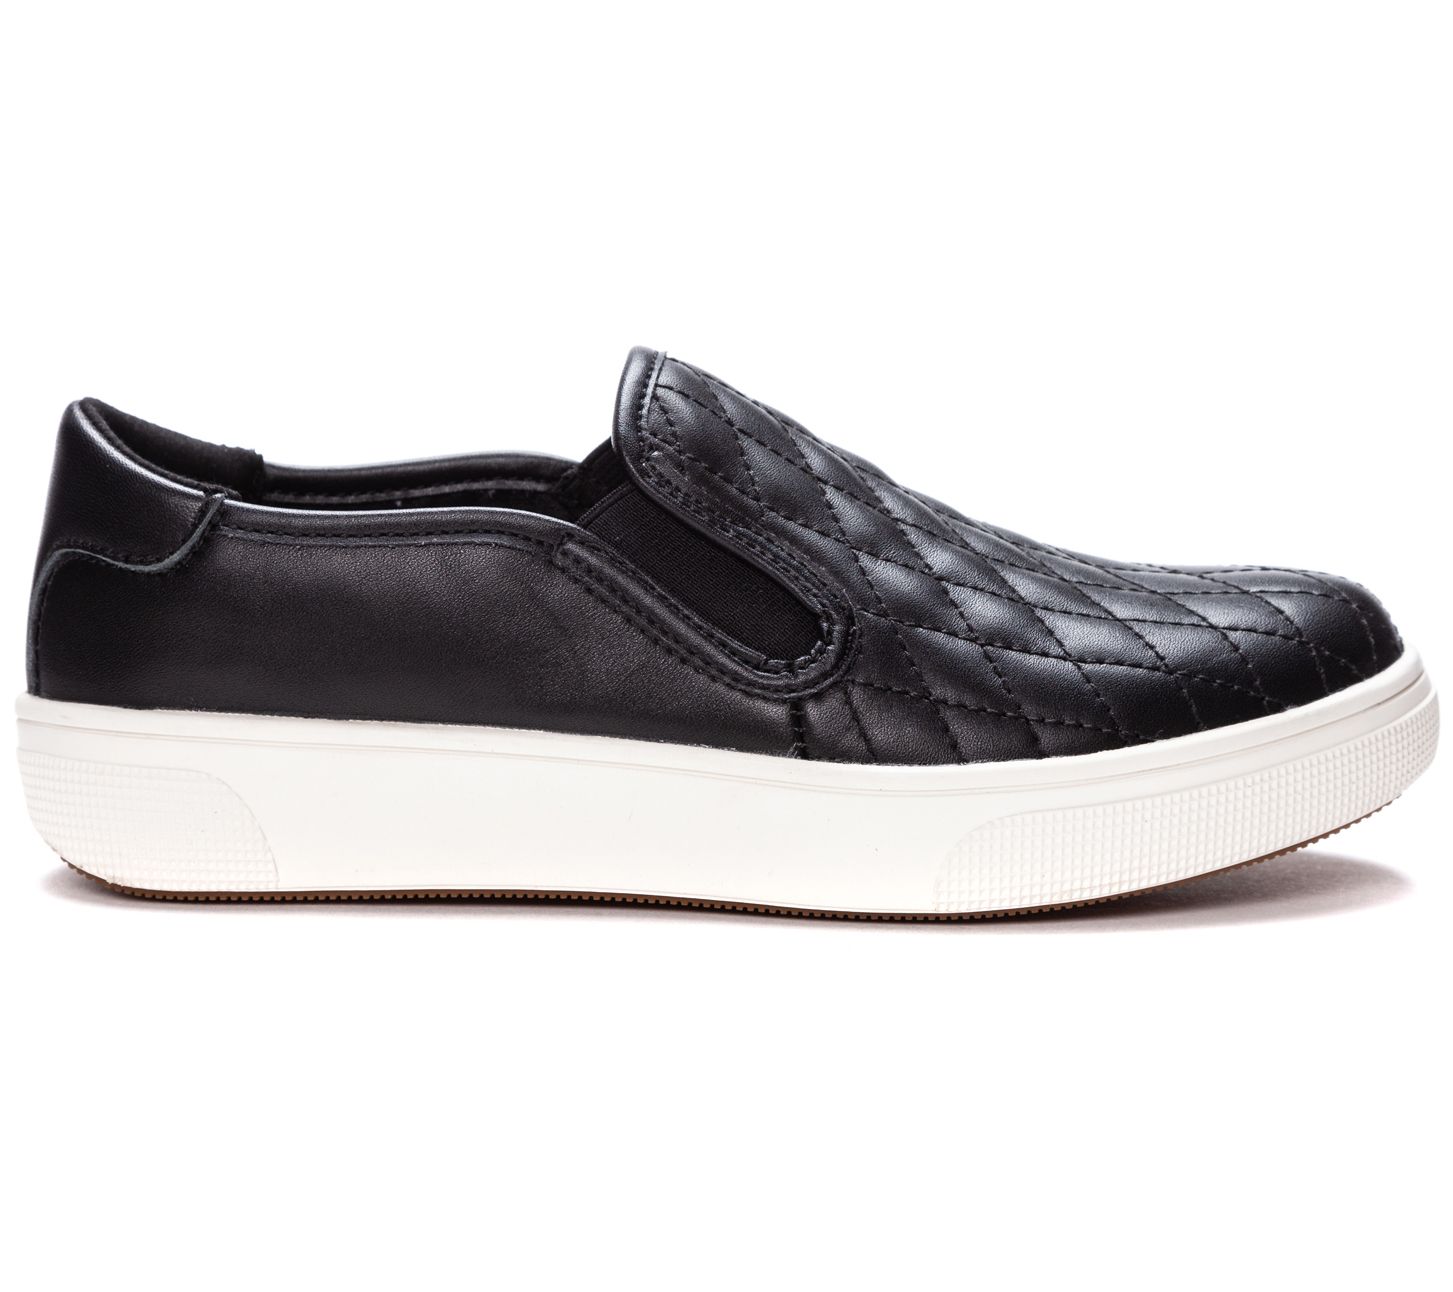 Propet Women's Leather Slip-On Sneakers - Karly - QVC.com